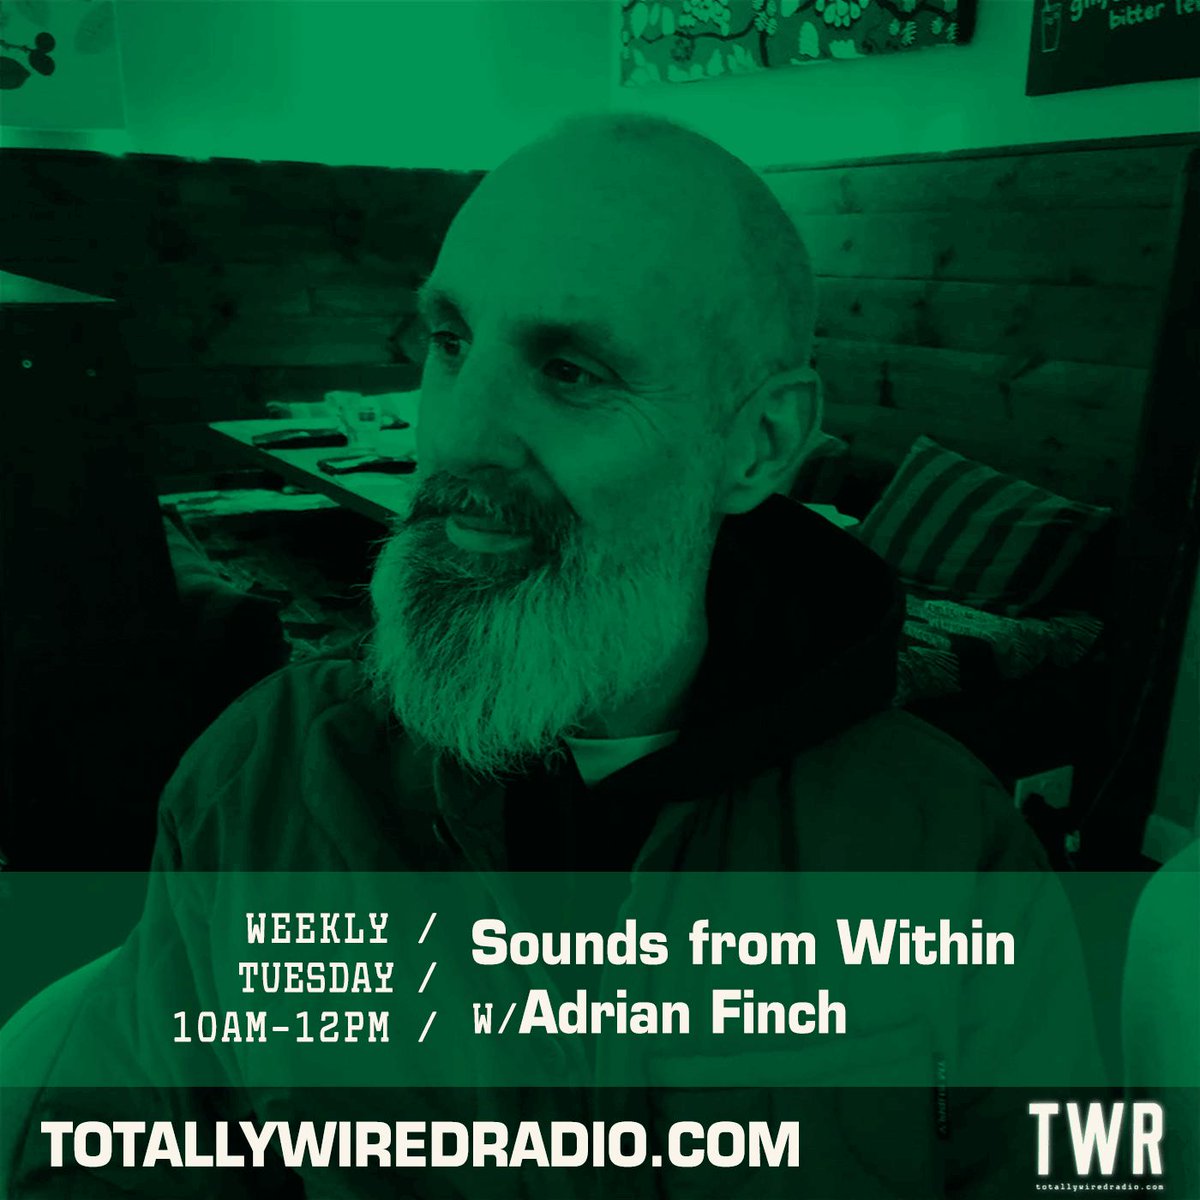 Sounds from Within w/ Adrian Finch #startingsoon on #TotallyWiredRadio Listen @ Link in bio. - #MusicIsLife #London - #Eclectic #FunkSoulJazz #RareGroove #Chillout #HipHop